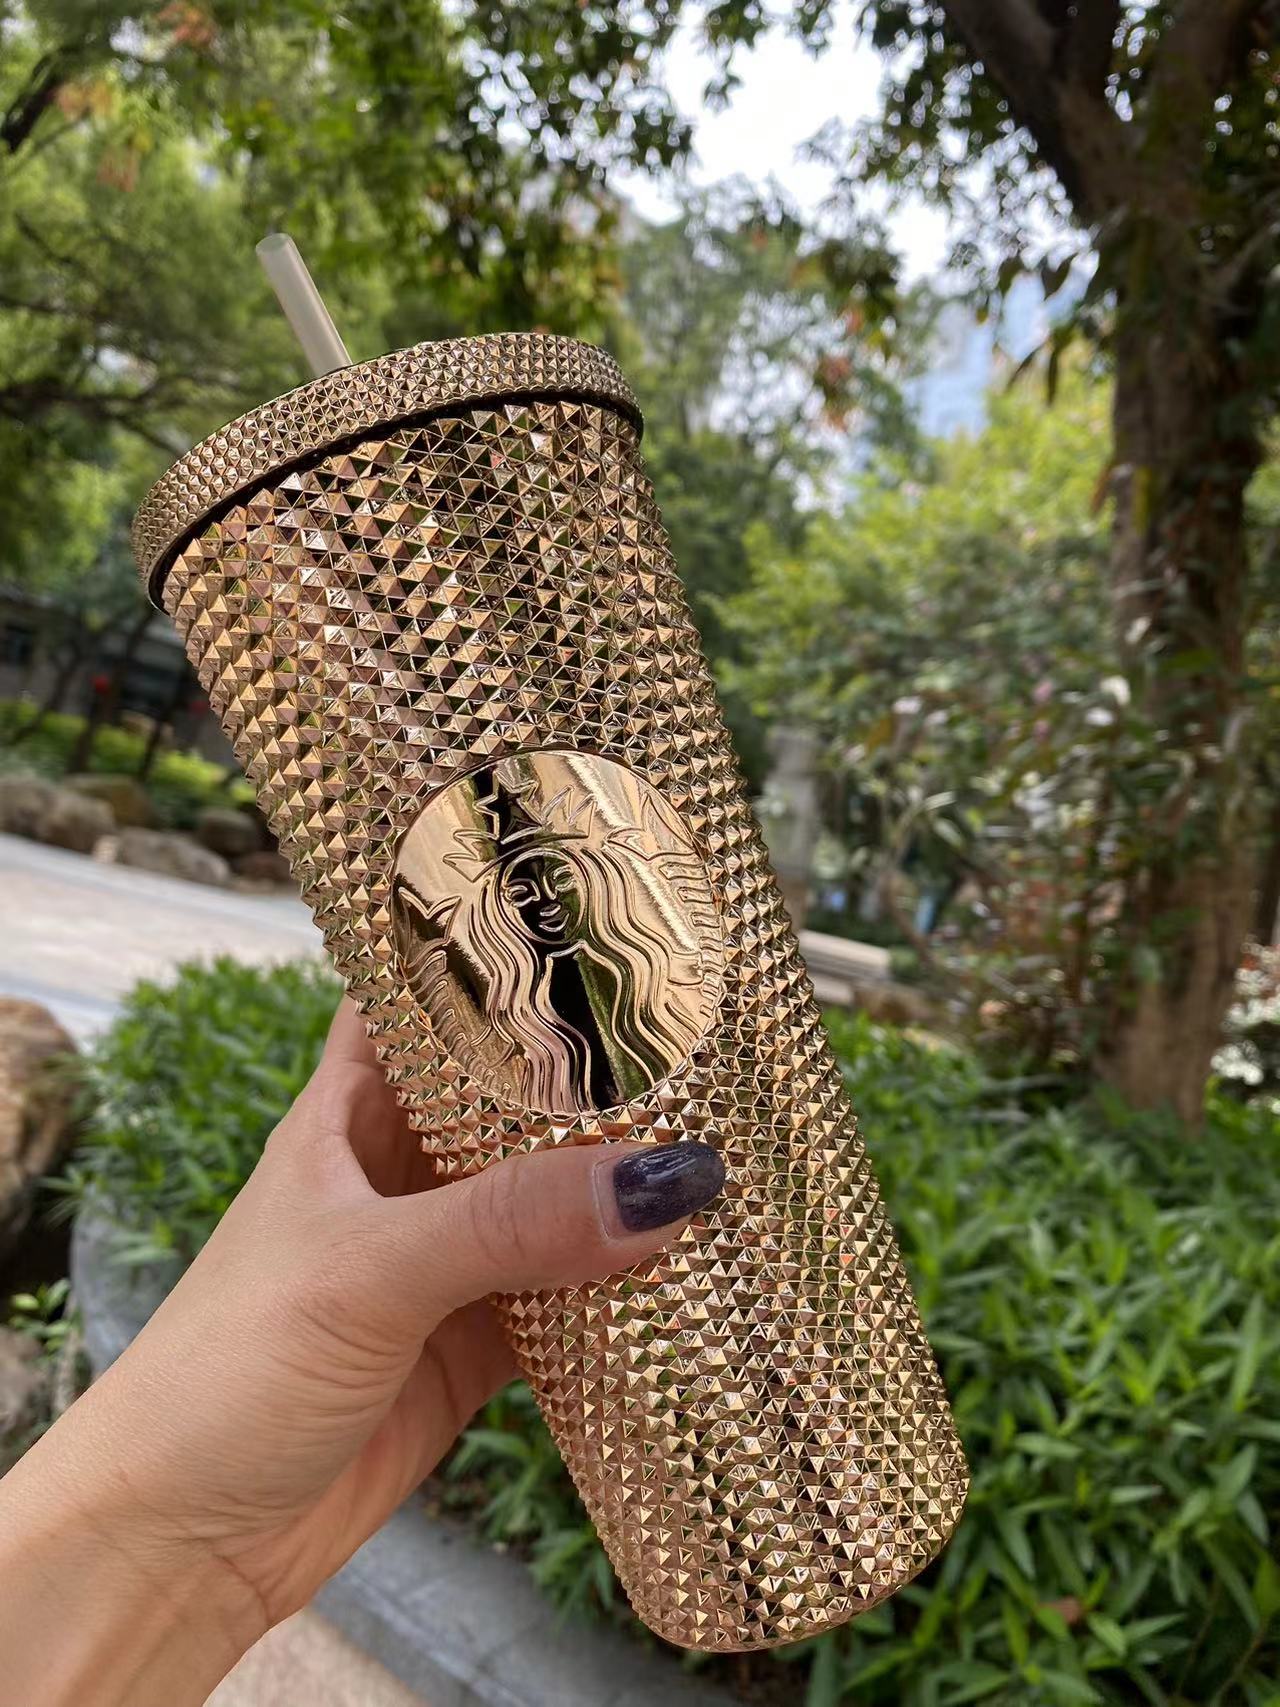 Rose gold Studded Starbucks cup. Never used. price - Depop